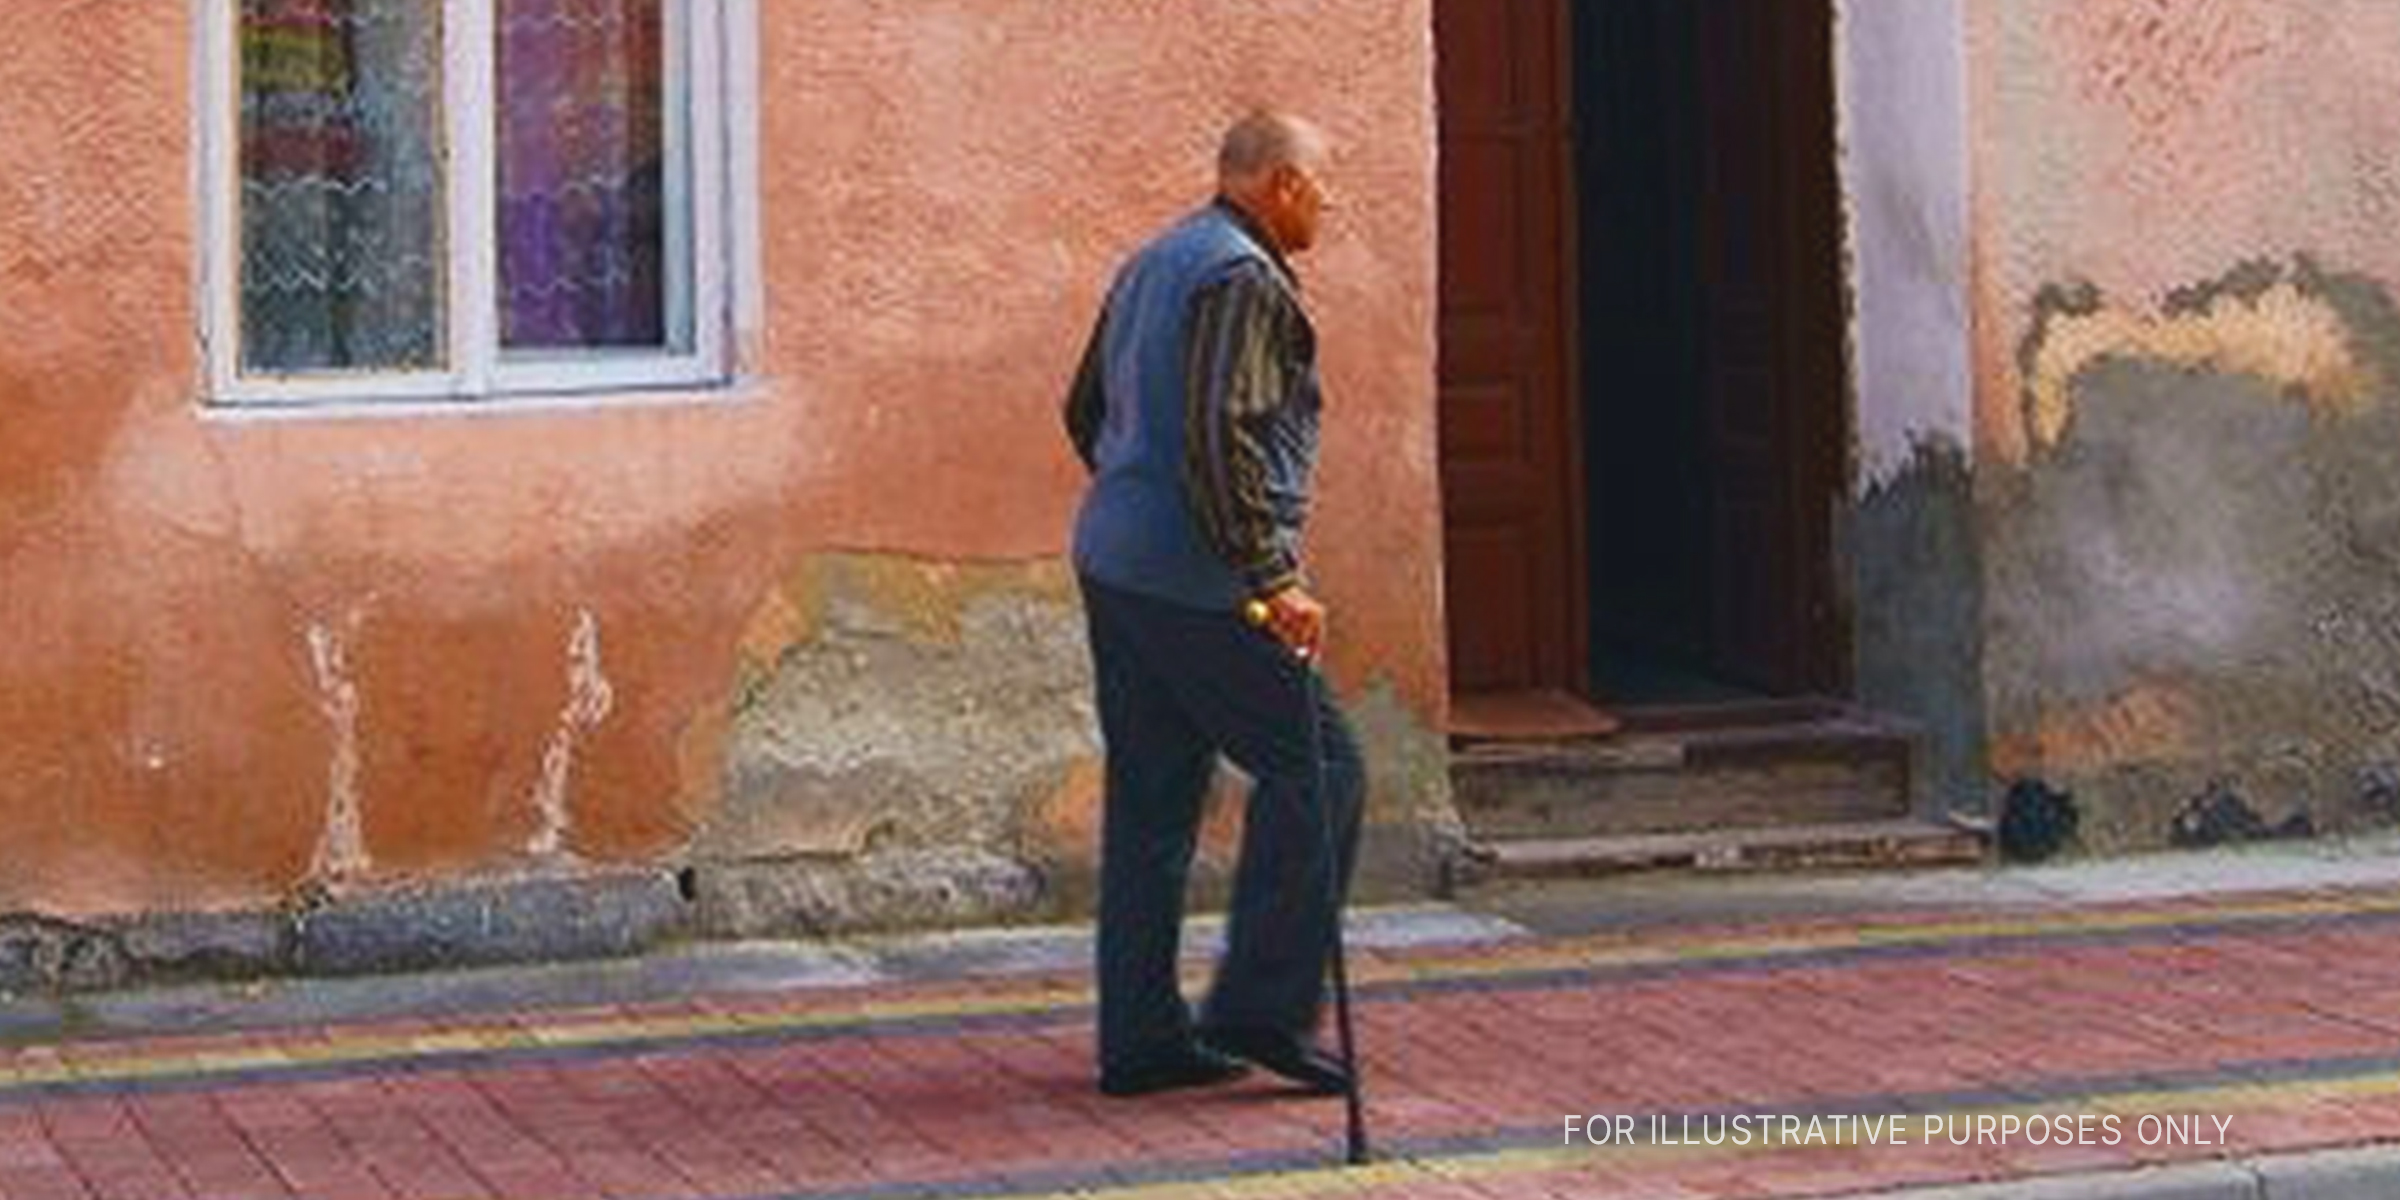 Old man walking in front of house. | Source: Flickr / Isabel Sommerfeld (CC BY 2.0)